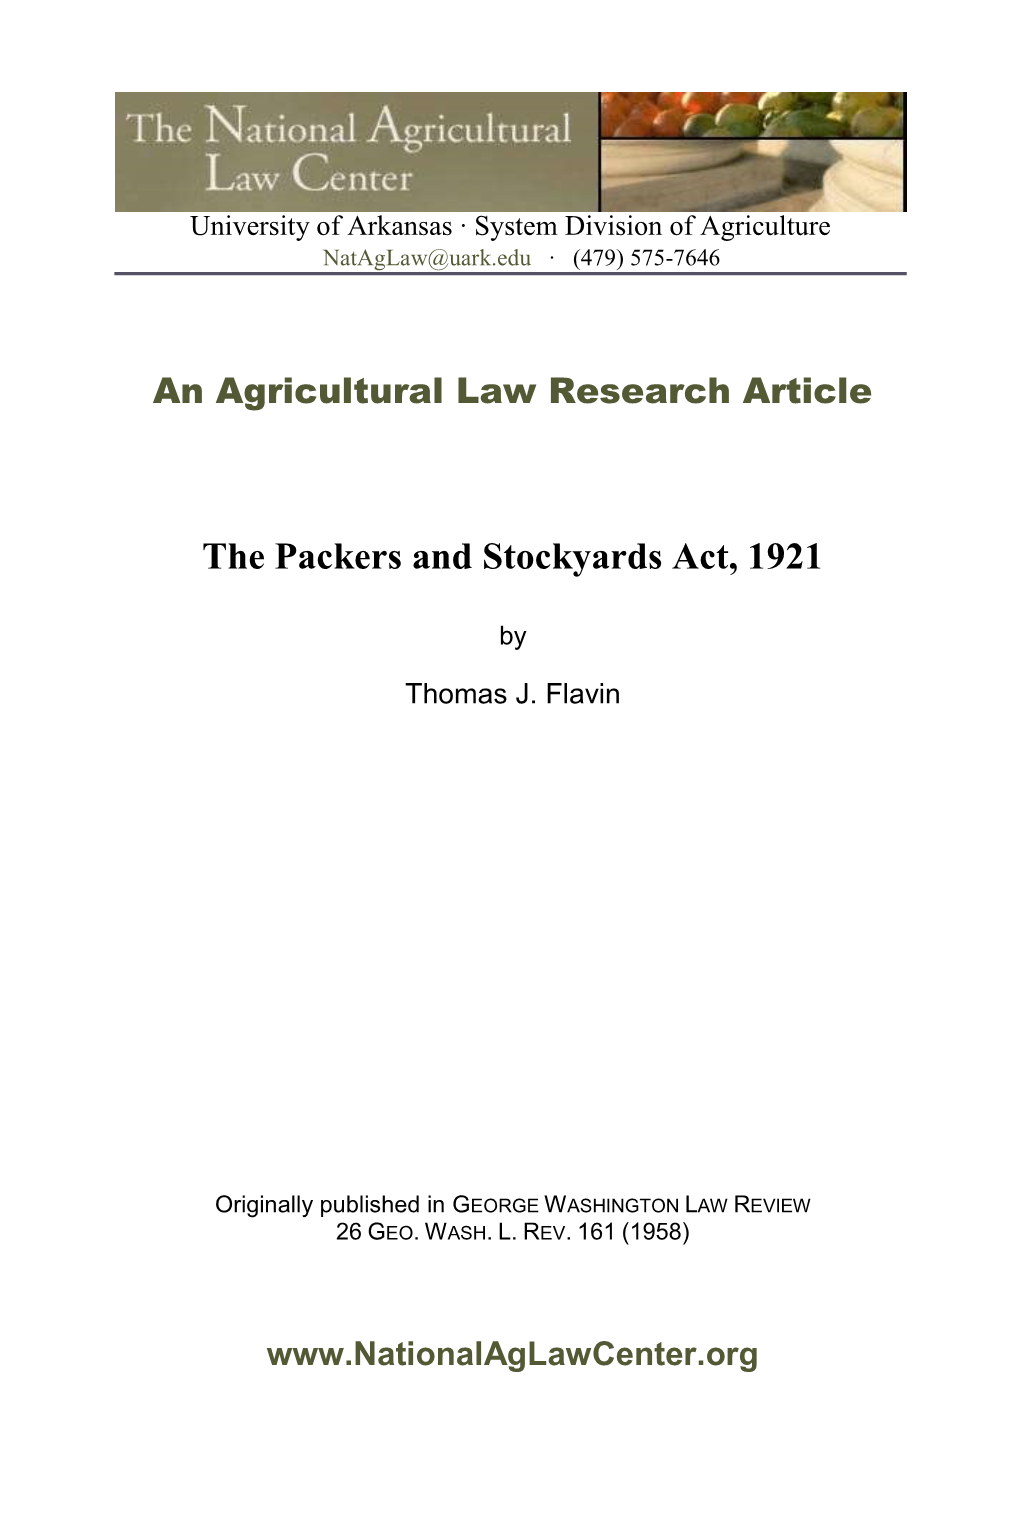 The Packers and Stockyards Act, 1921